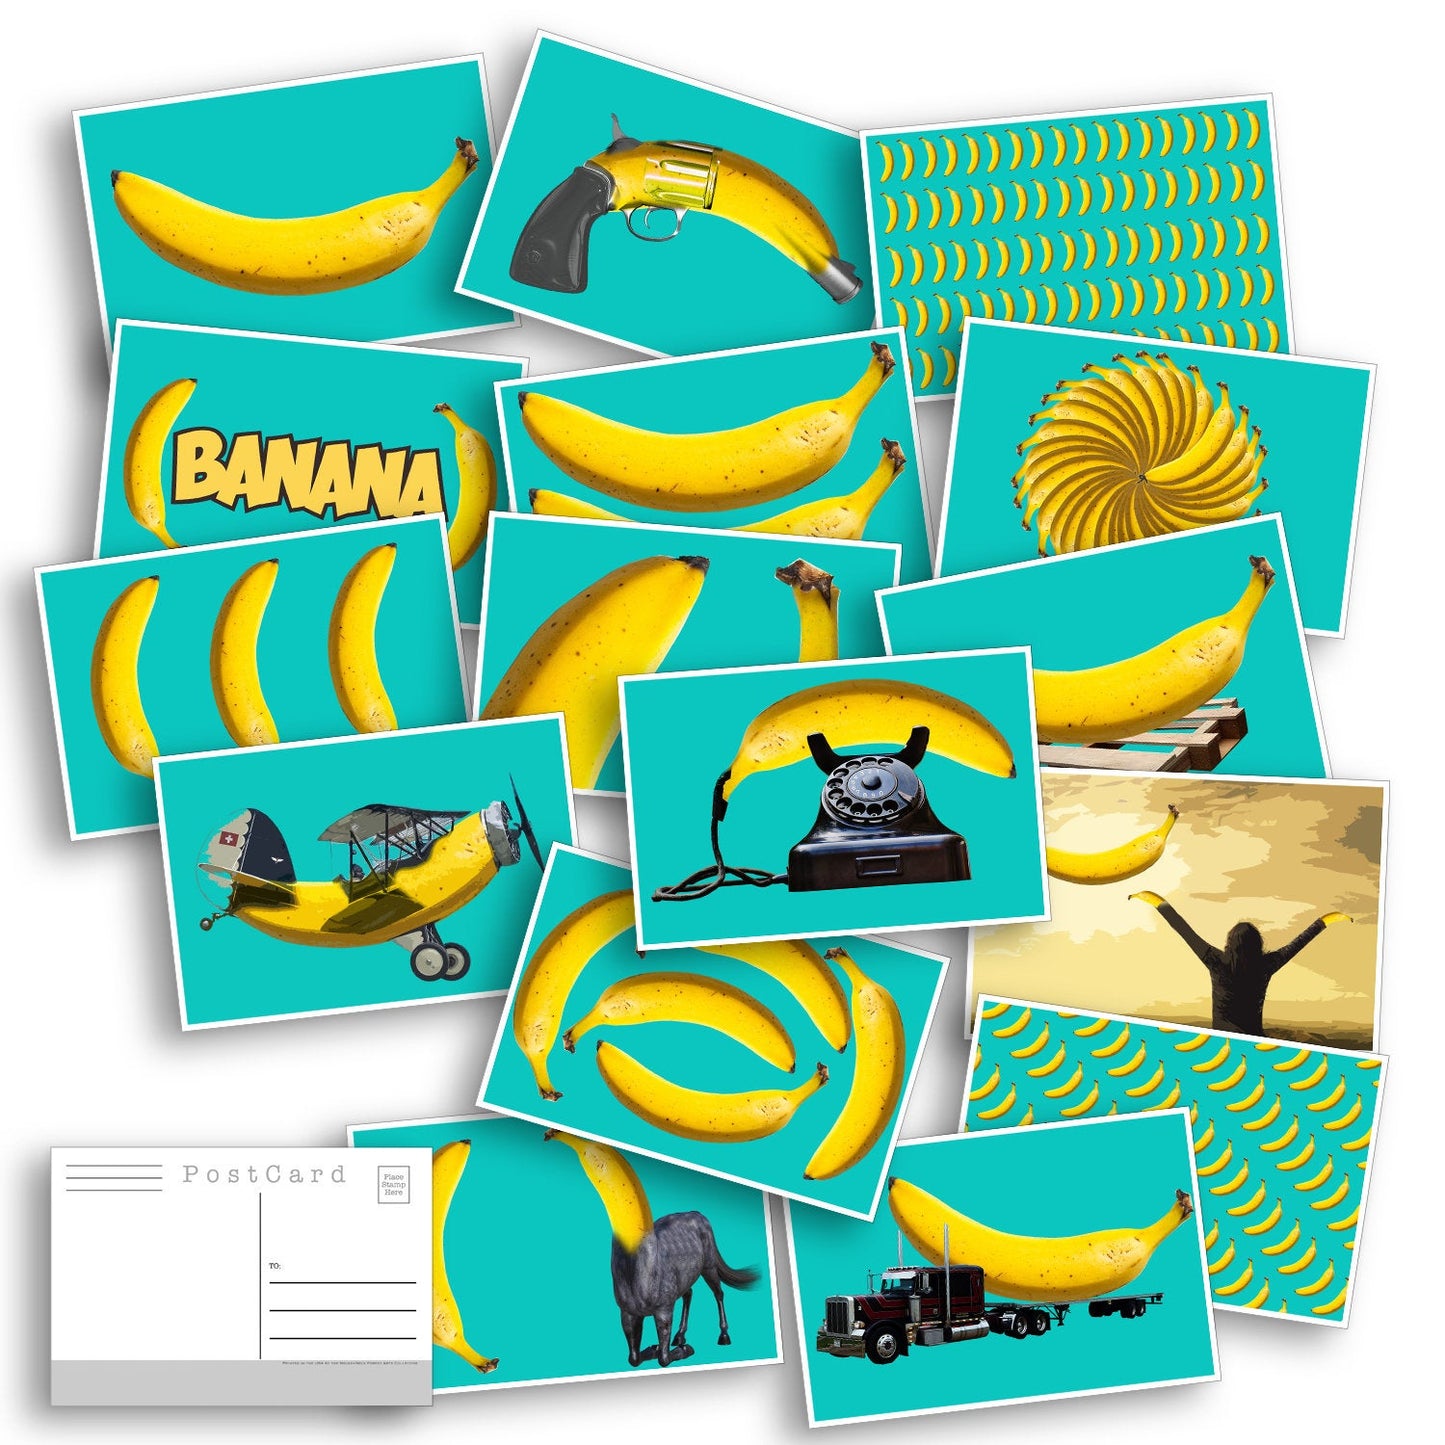 18 Bright Beautiful Banana Postcards great for Scrapbooking, mailing as Post Cards or collage kits